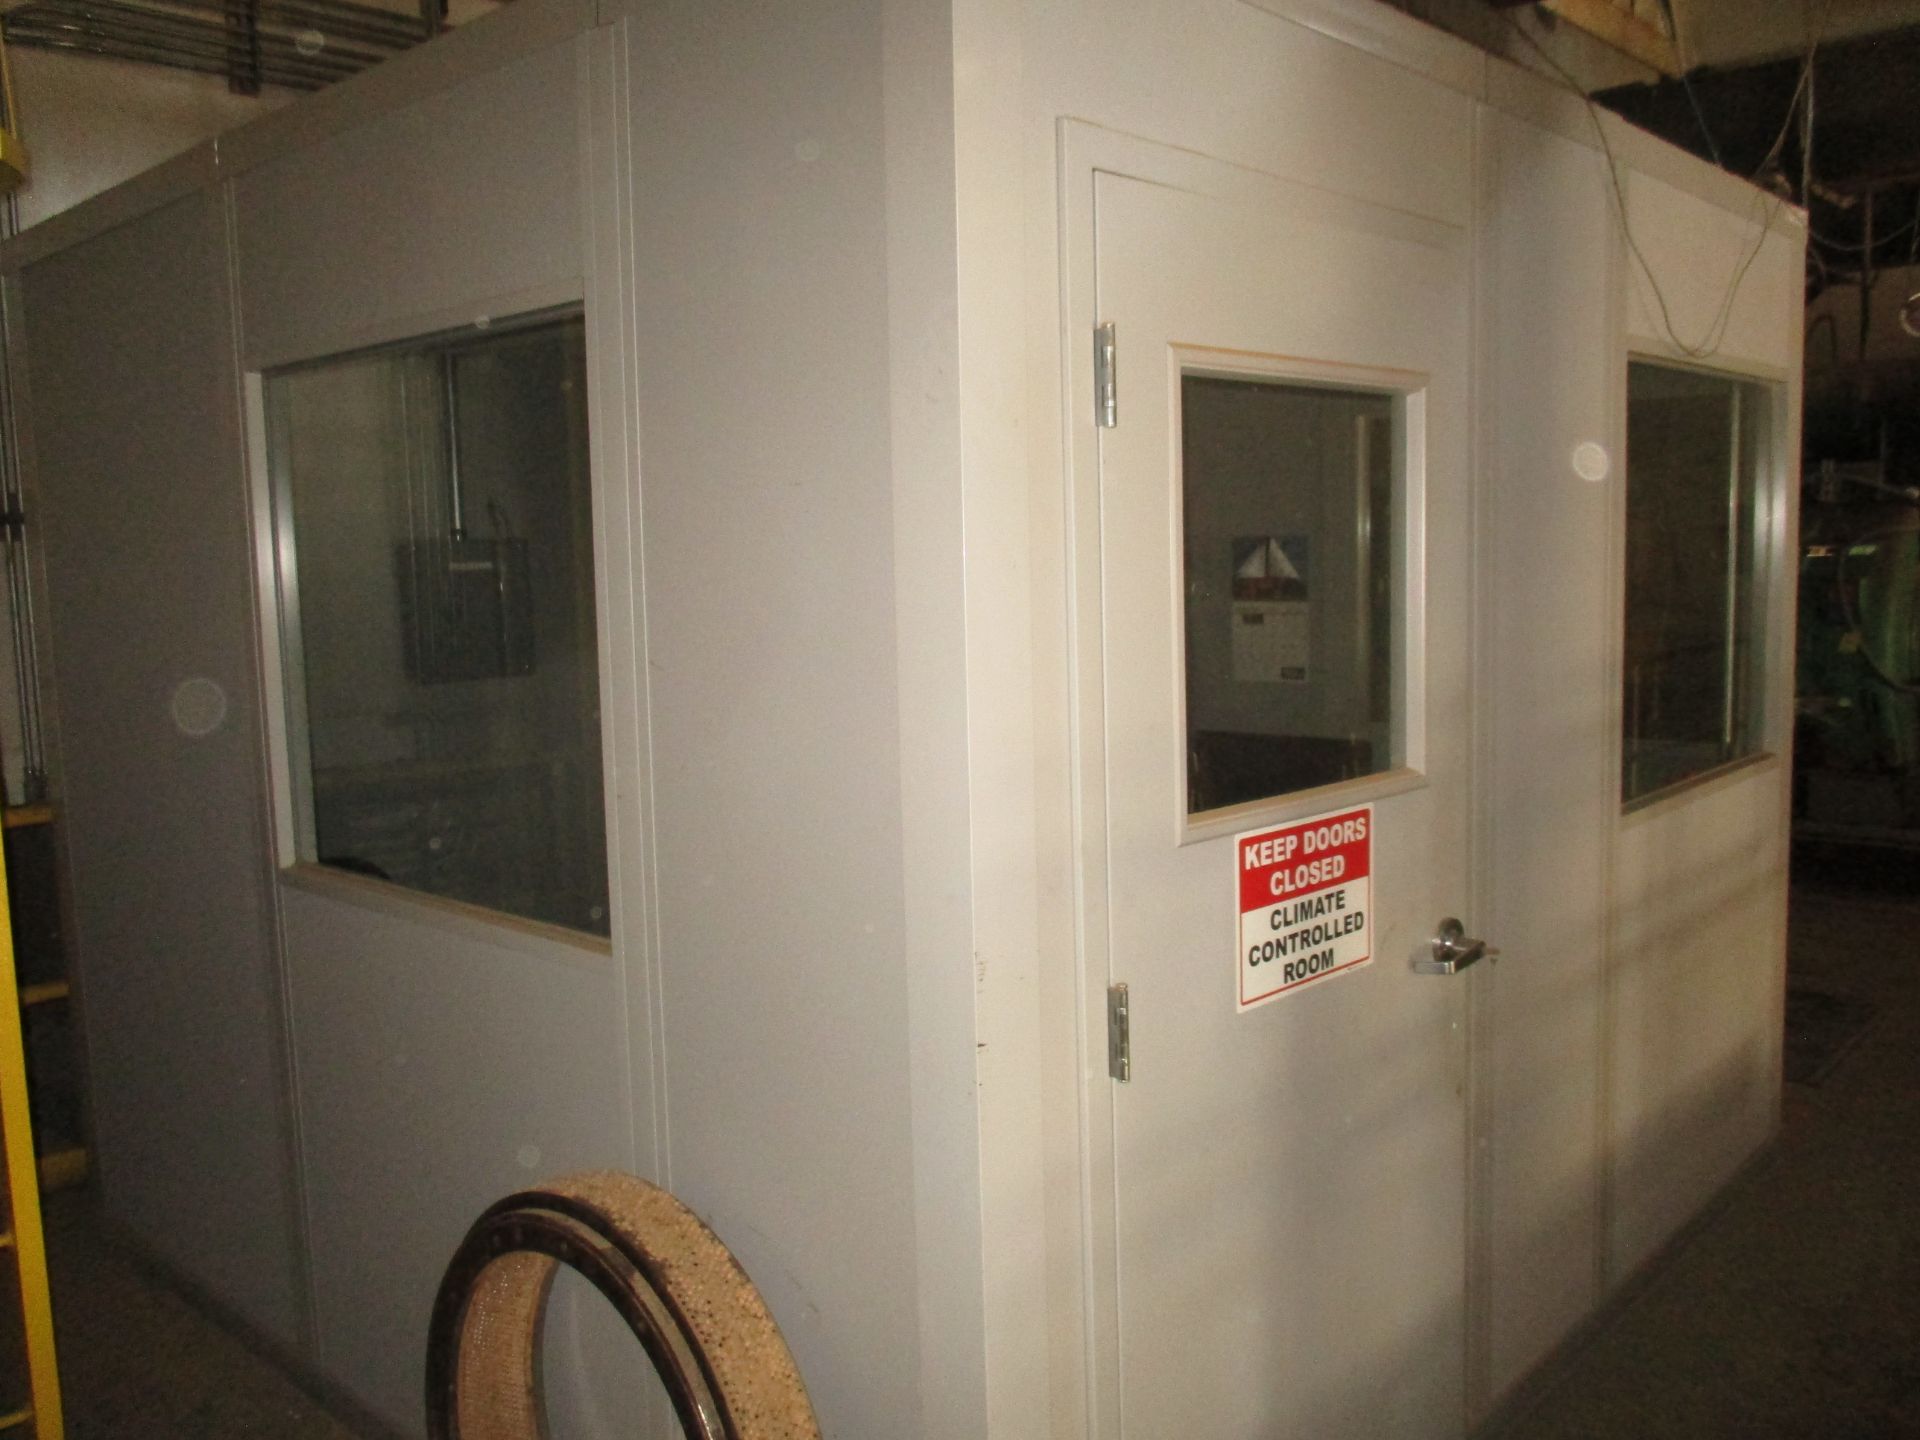 Special Built Pre-Fab Pre-Wired Port. Control Room, 10' 5" x 10' 4" x 8' - Image 3 of 3